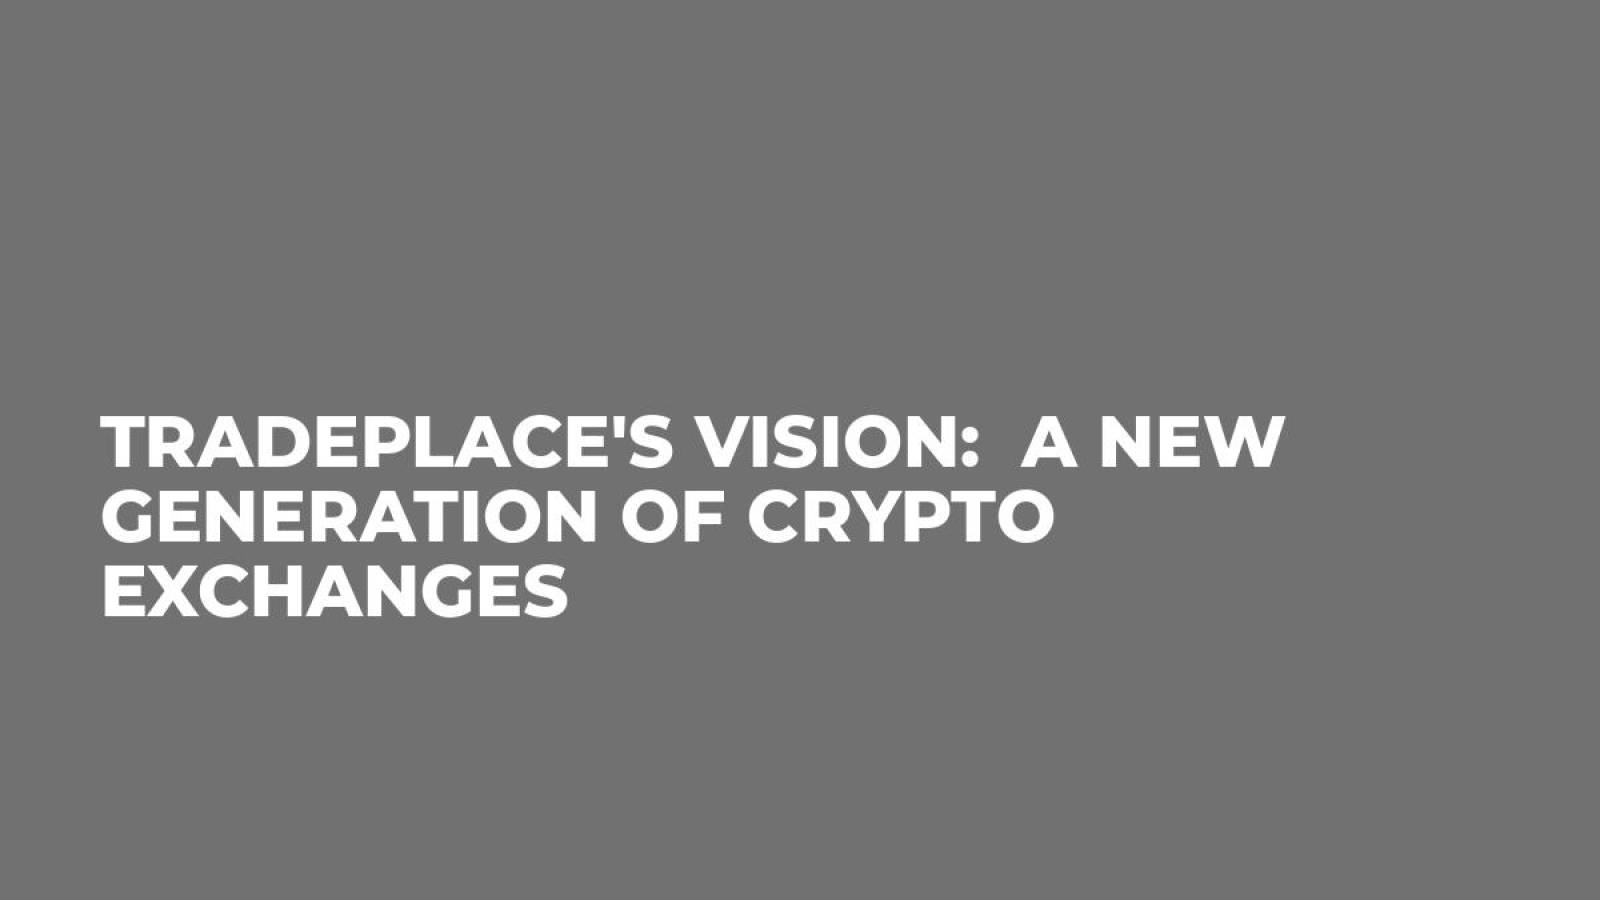 TradePlace's Vision:  A New Generation of Crypto Exchanges